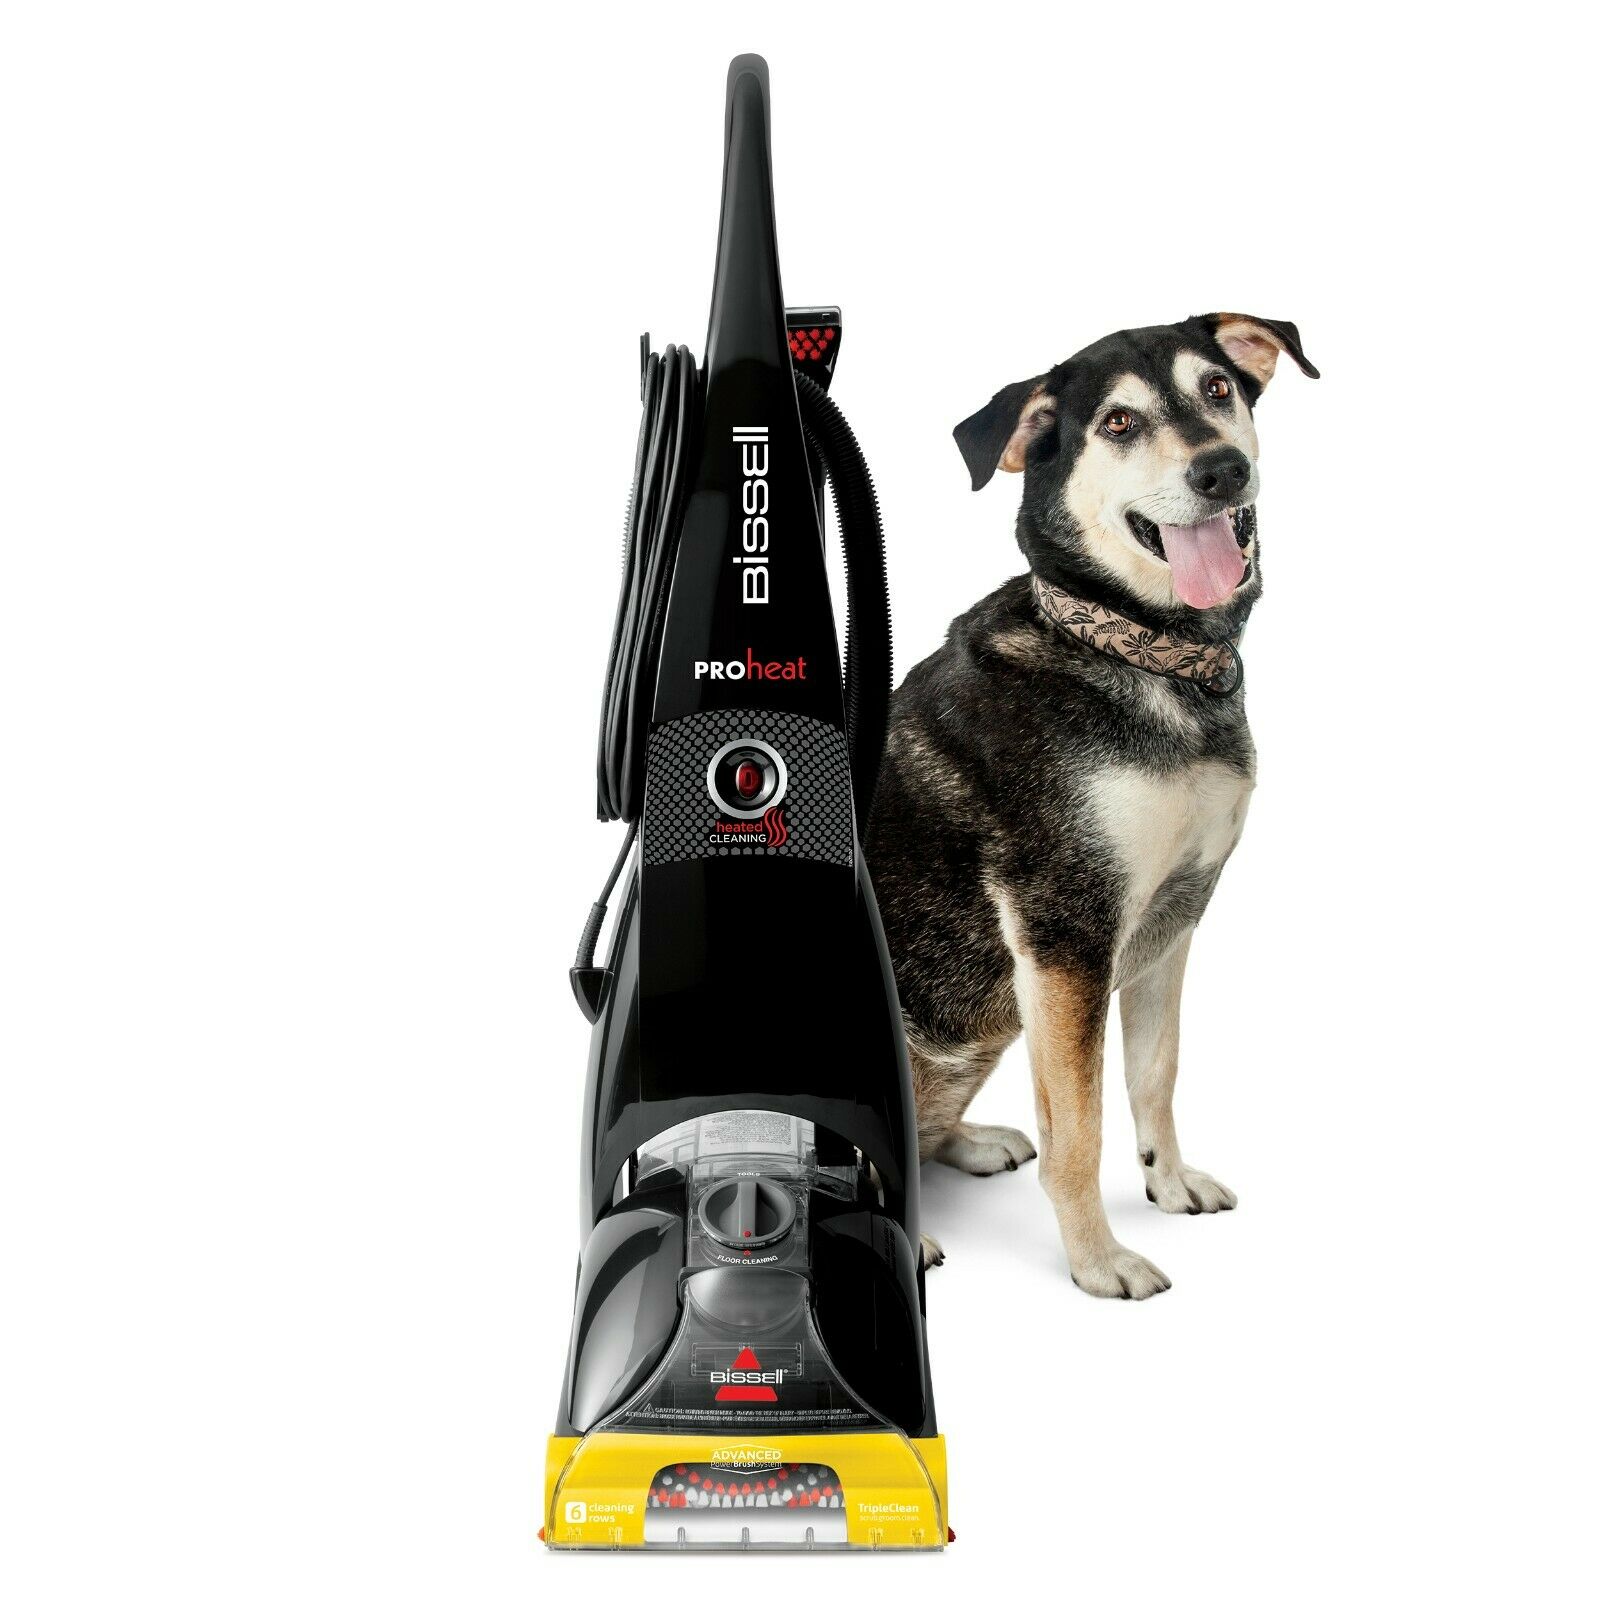 ✅ FREE SHIPPING ✅BISSELL Proheat Advanced Full-Size Carpet Cleaner Carpet Washer